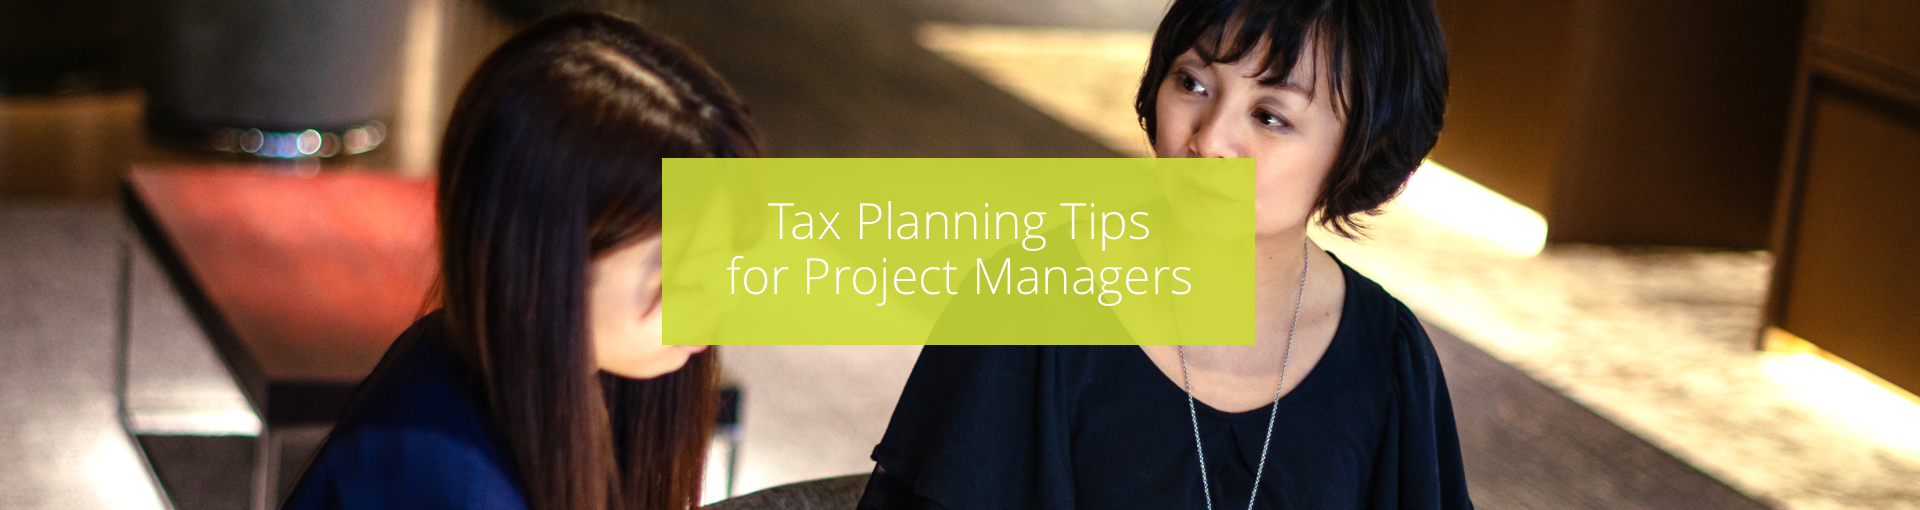 Tax Planning Tips for Project Managers Featured Image